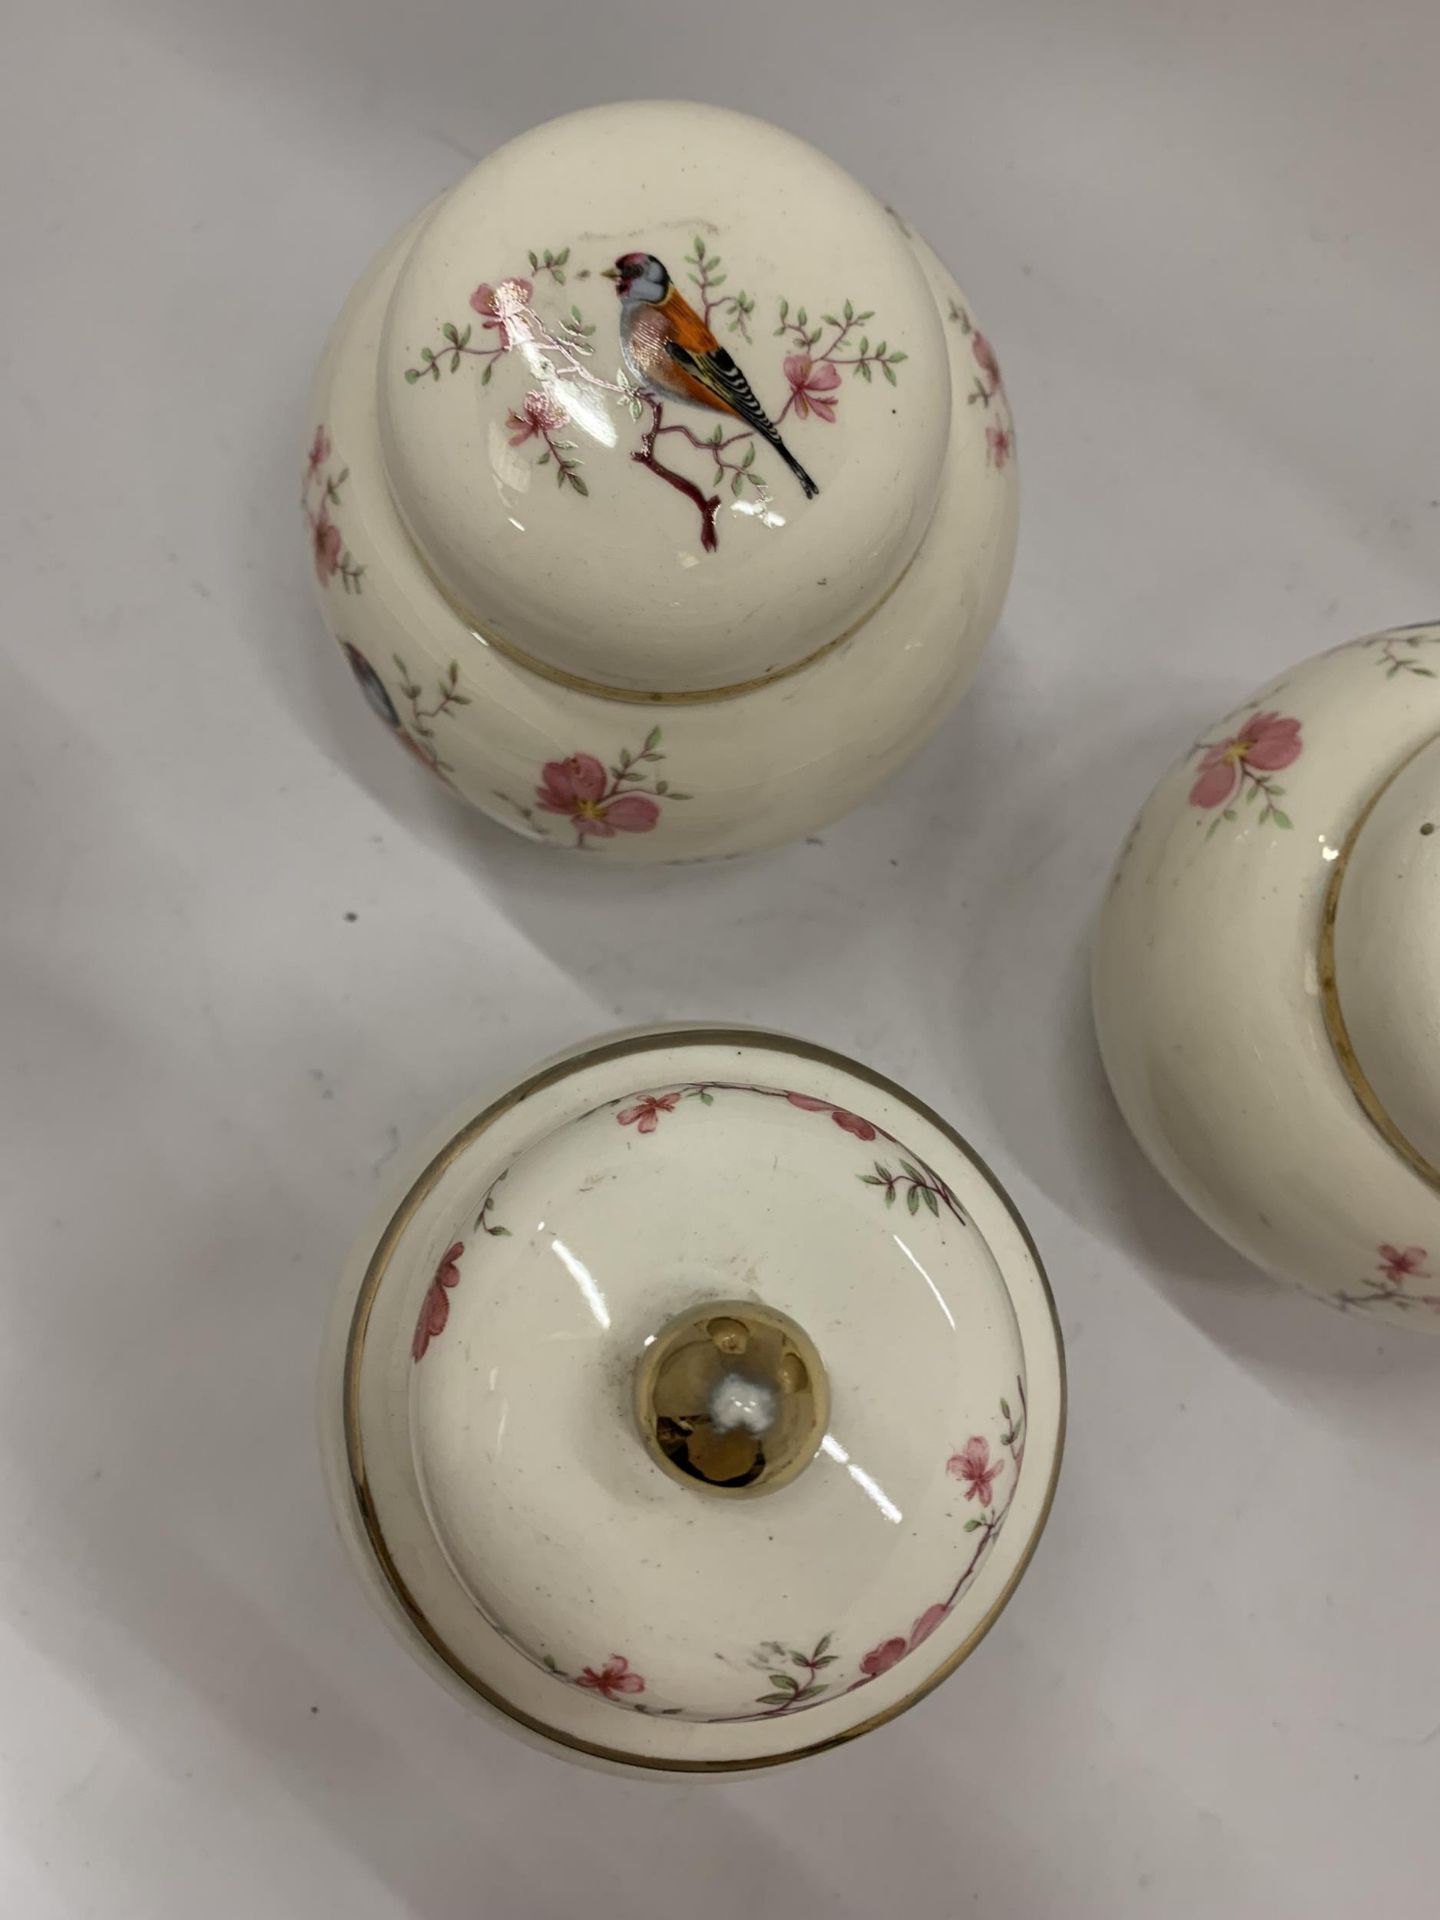 TWO ARTHUR WOOD GINGER JARS AND A TEMPLE JAR WITH BIRDS AND BLOSSOM DESIGN - Image 5 of 8